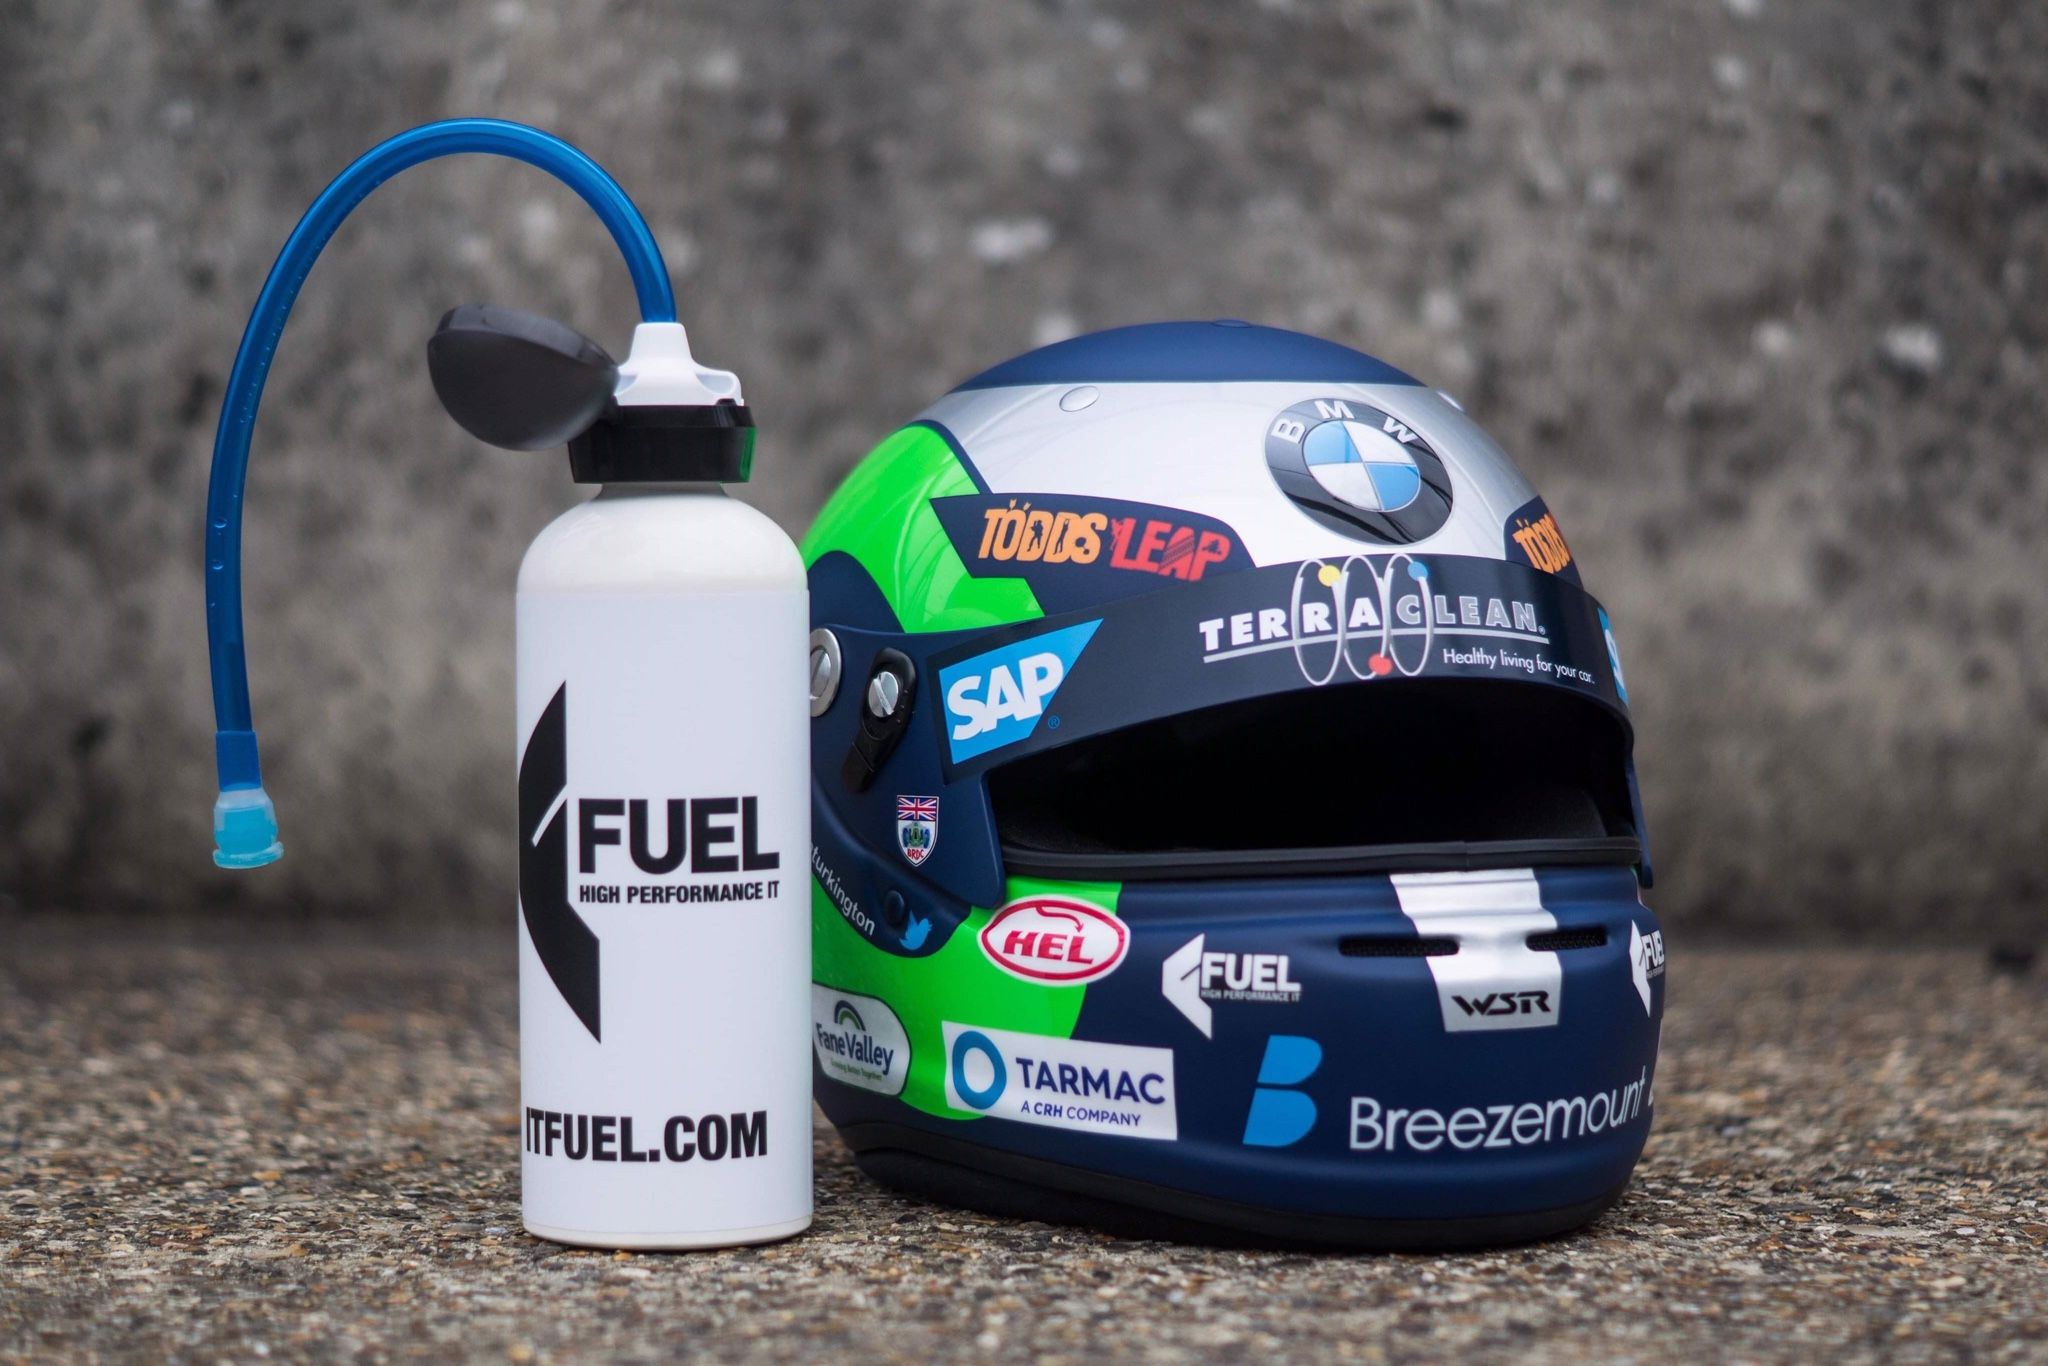 FUEL announce continued support for one of their Brand Ambassadors